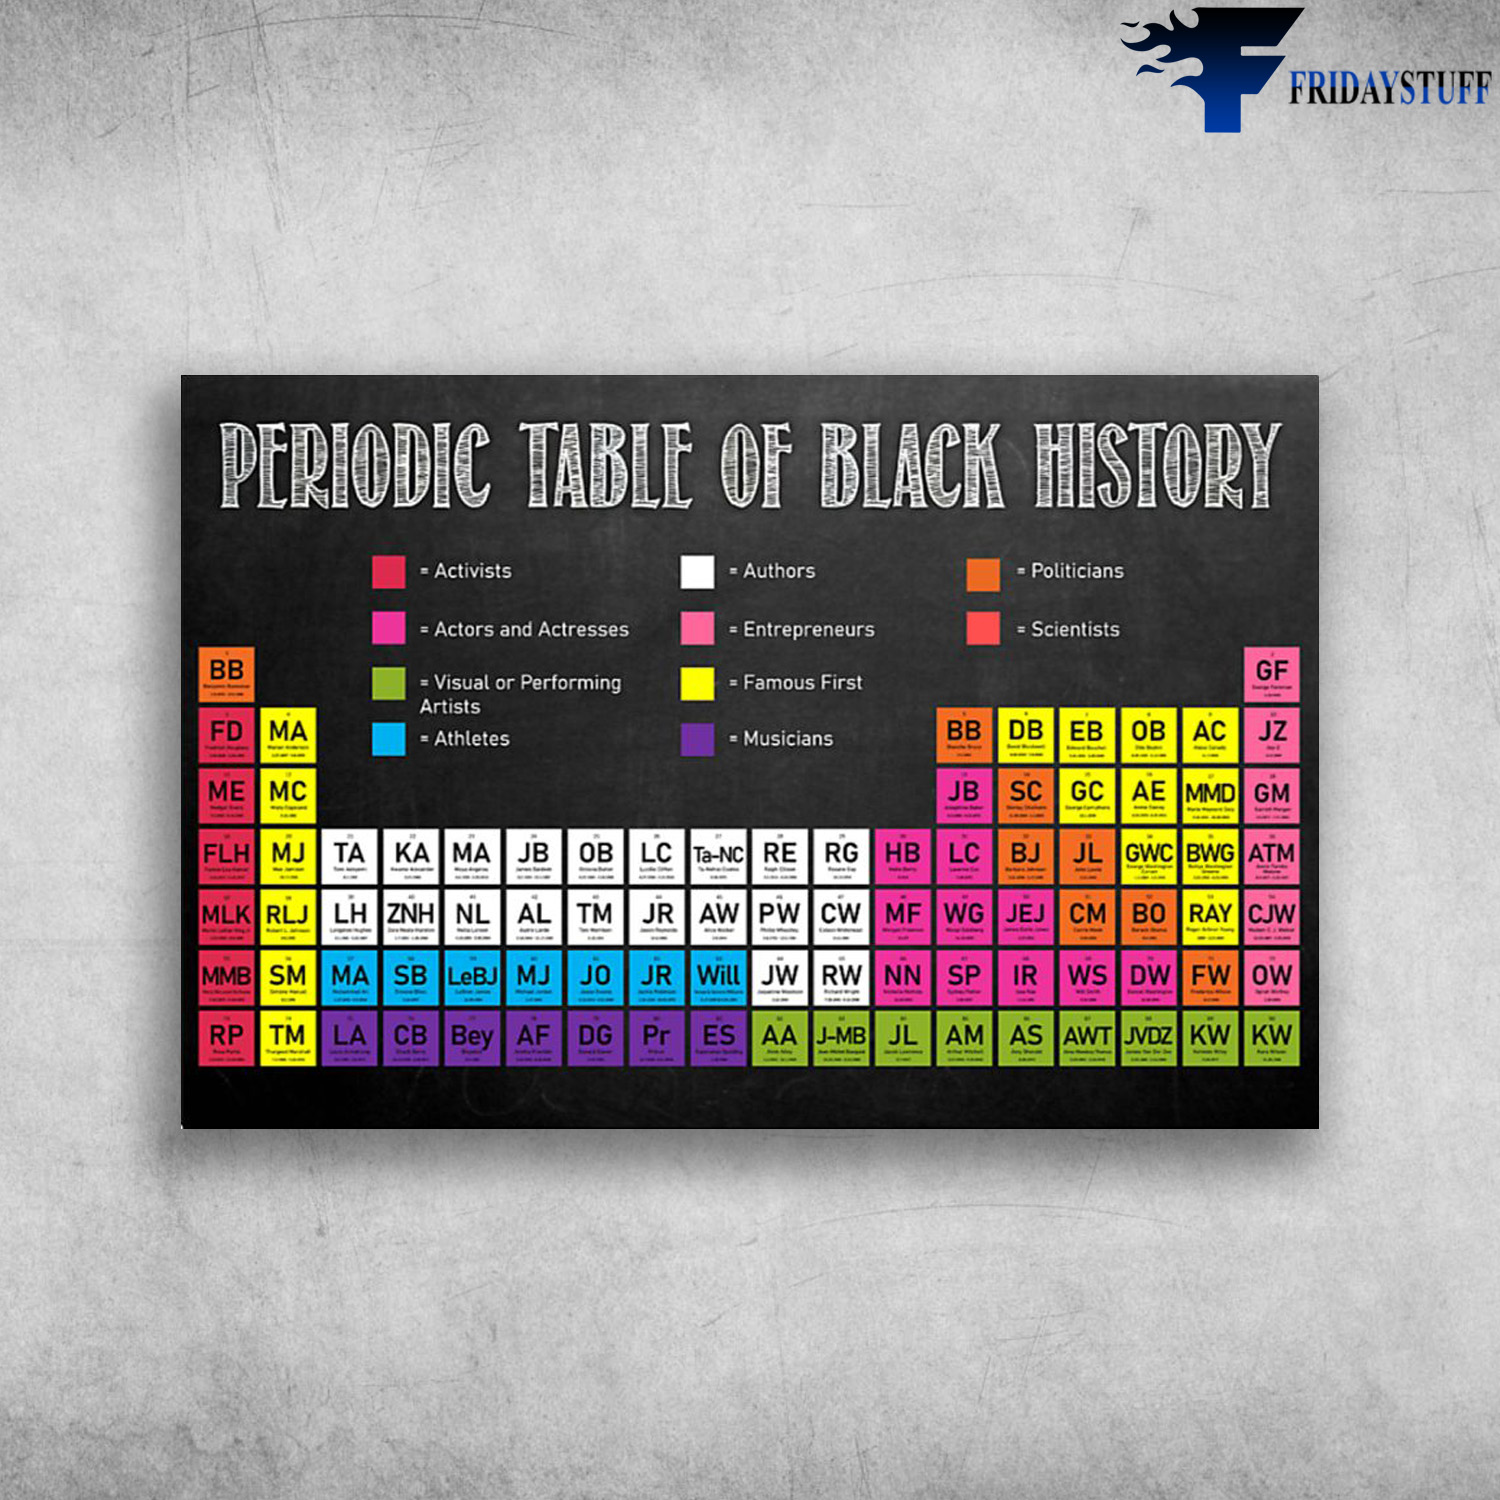 Periodic Table Of Black History - Activists, Actors And Actresses, Visual Or Performing Artists, Athletes, Authors, Entrepreneurs, Famous First, Musicians, Politician, Scientists